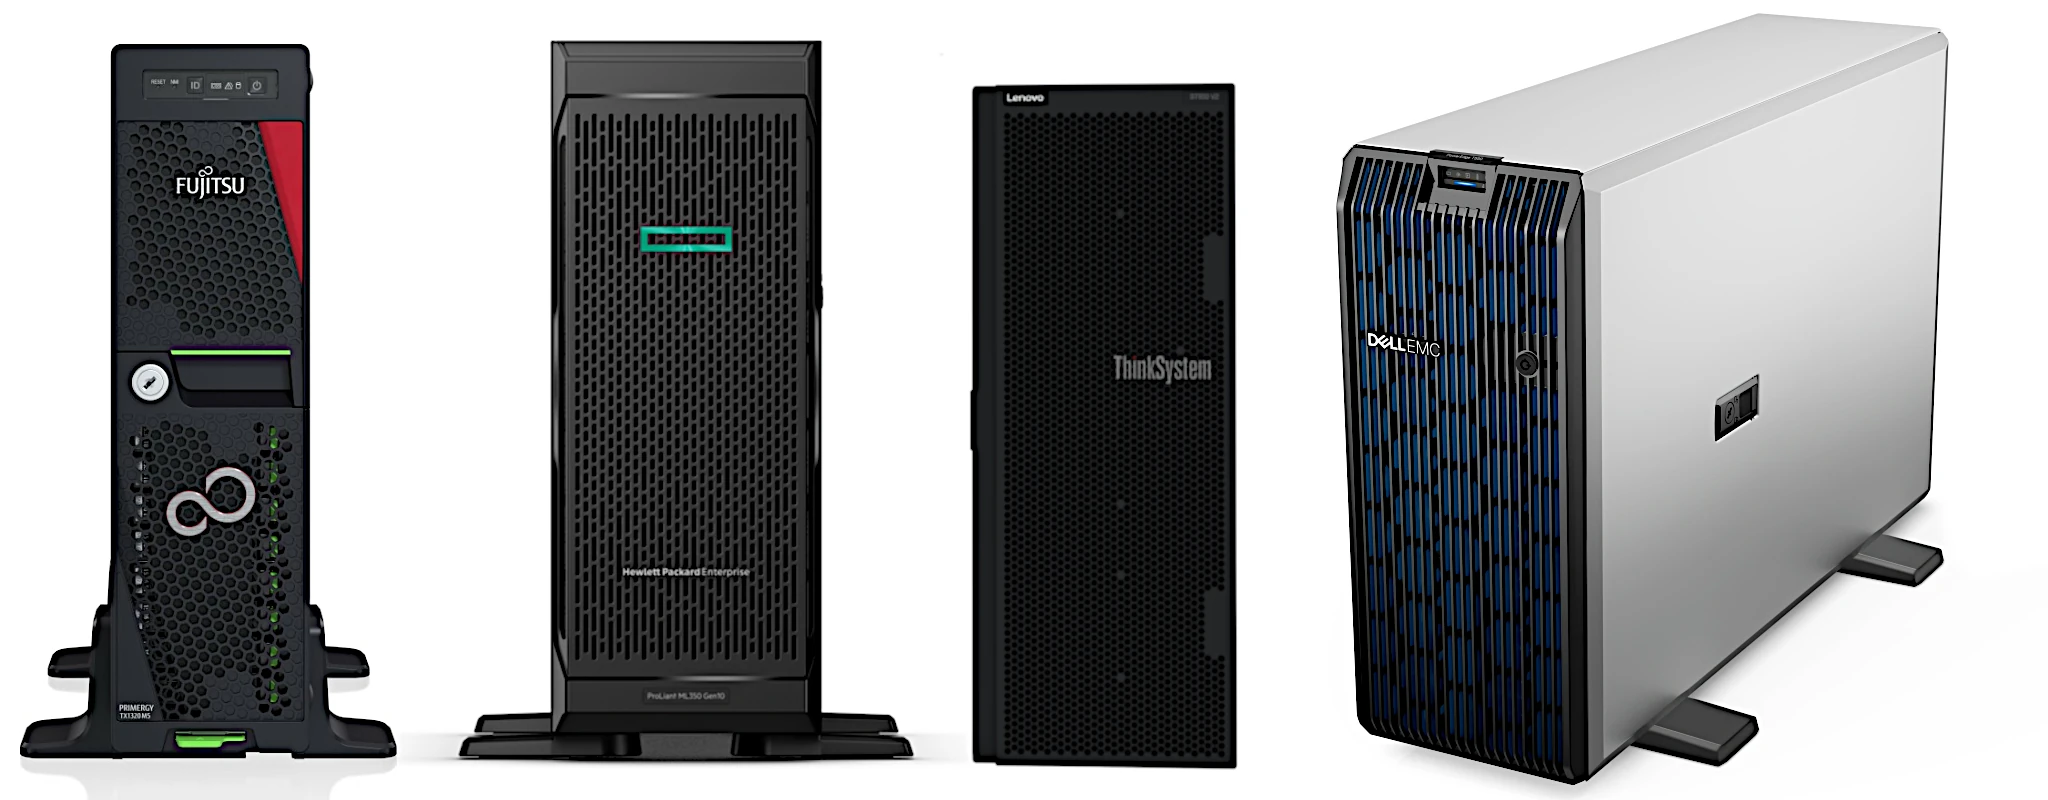 Tower Servers Scalable Performance and Powerful